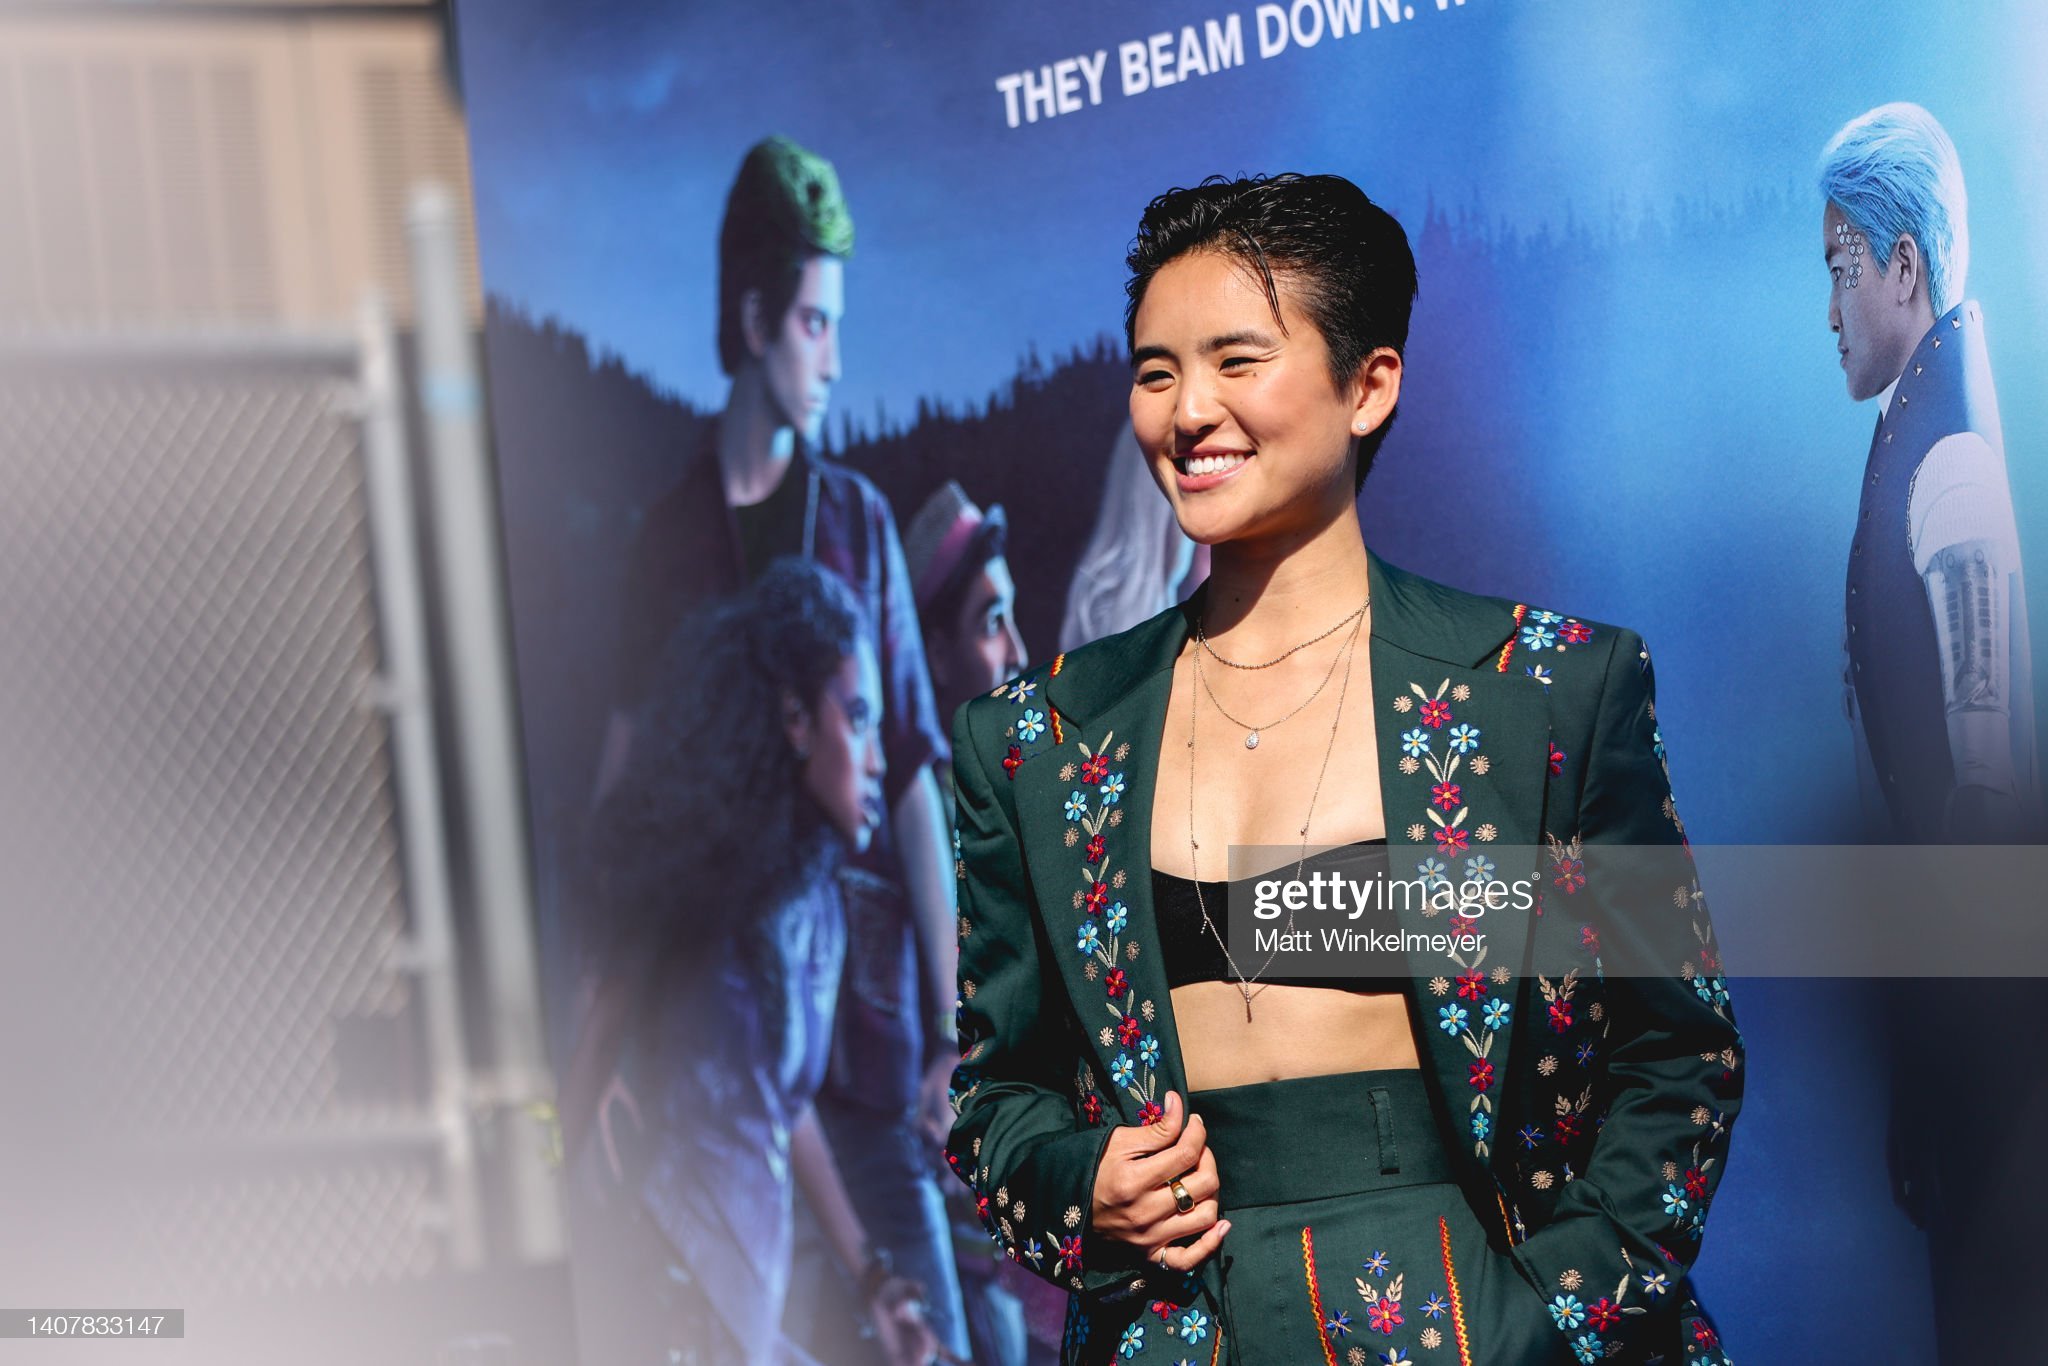 gettyimages-1407833147-2048x2048.jpg